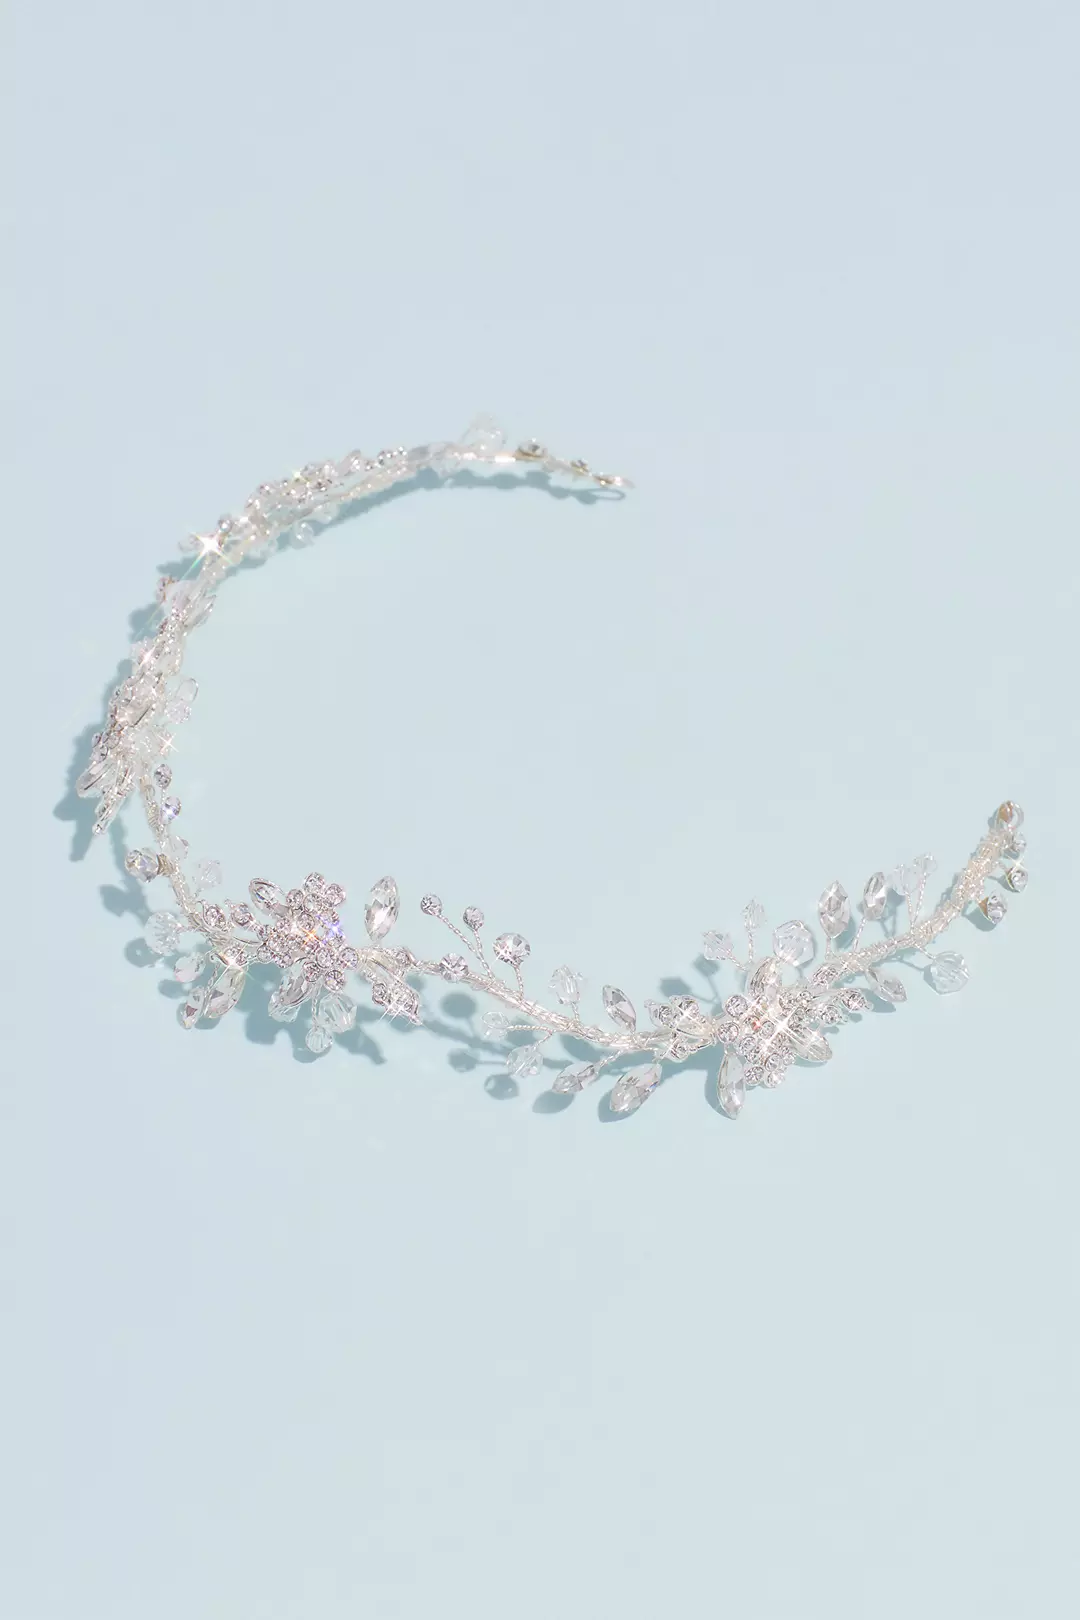 Flowering Hair Vine with Crystals and Beads Image